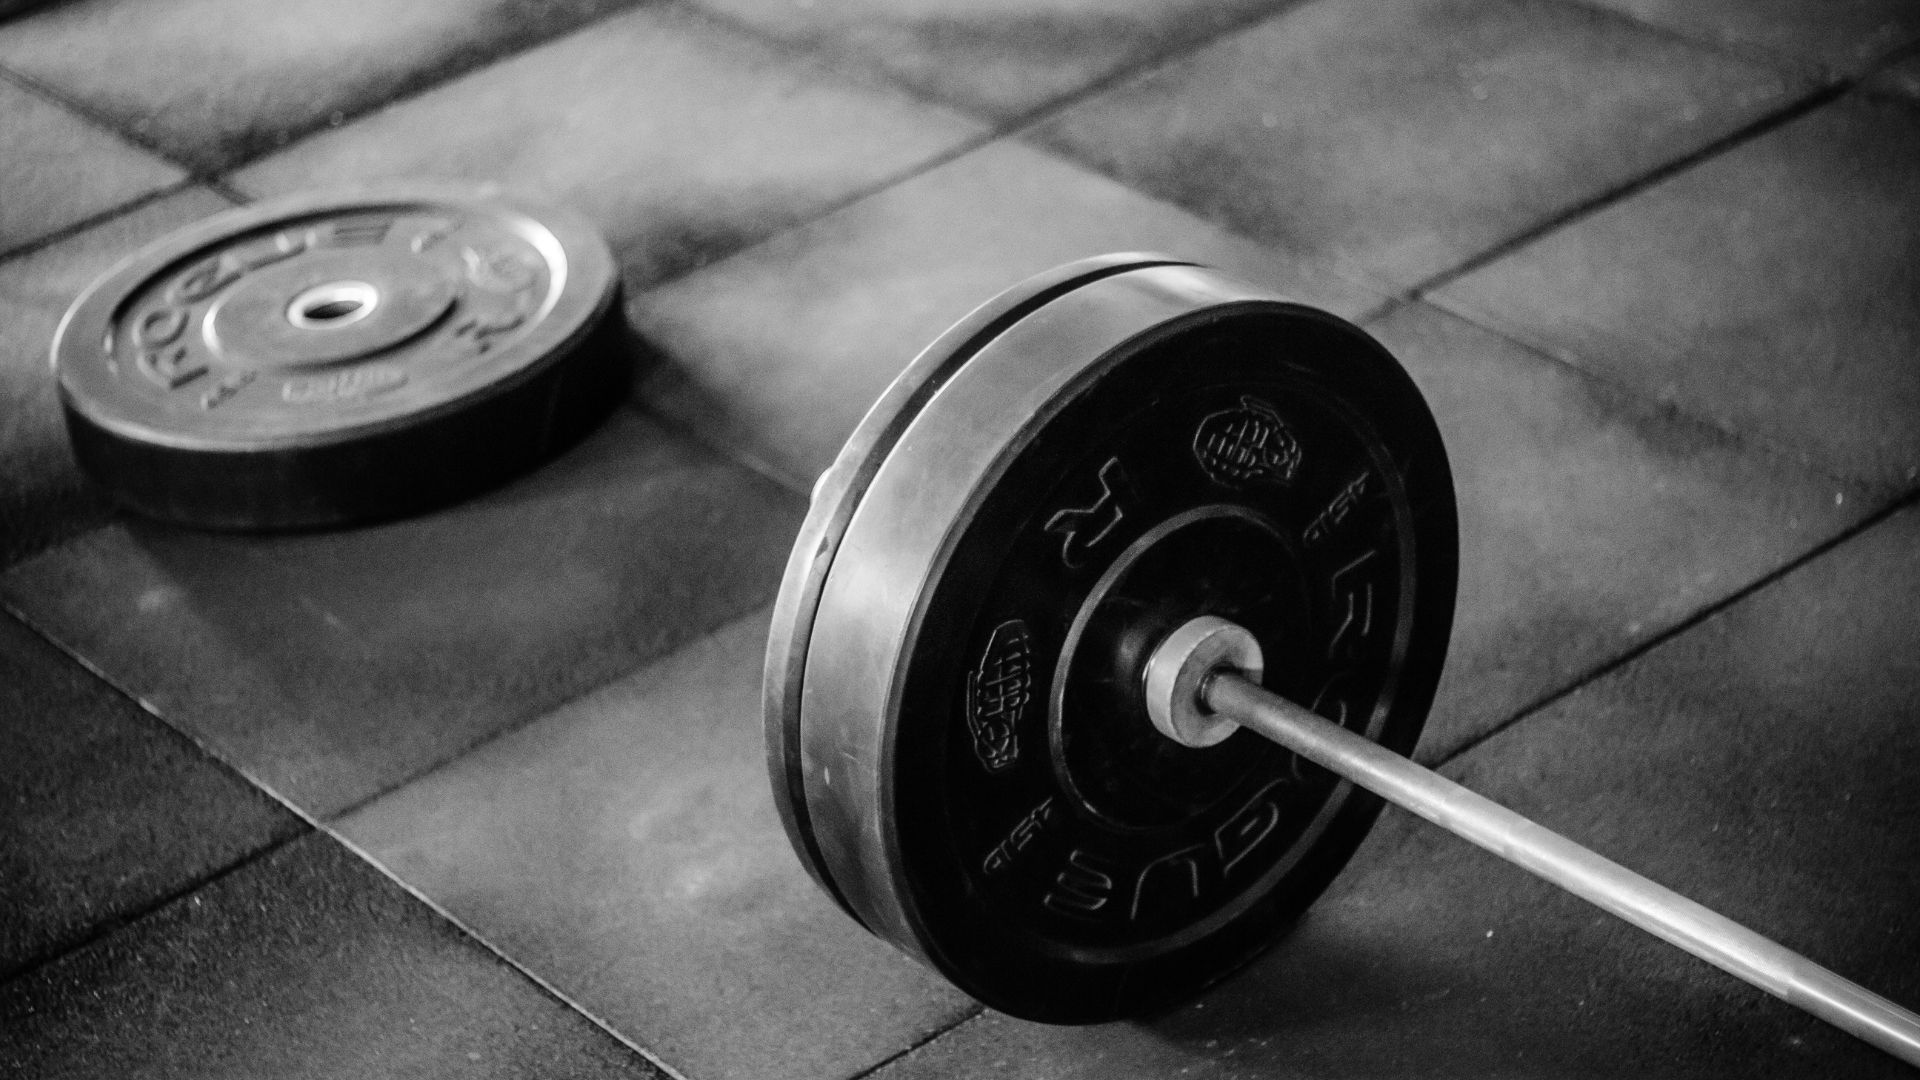 Grayscale Photo of Black Adjustable Barbell